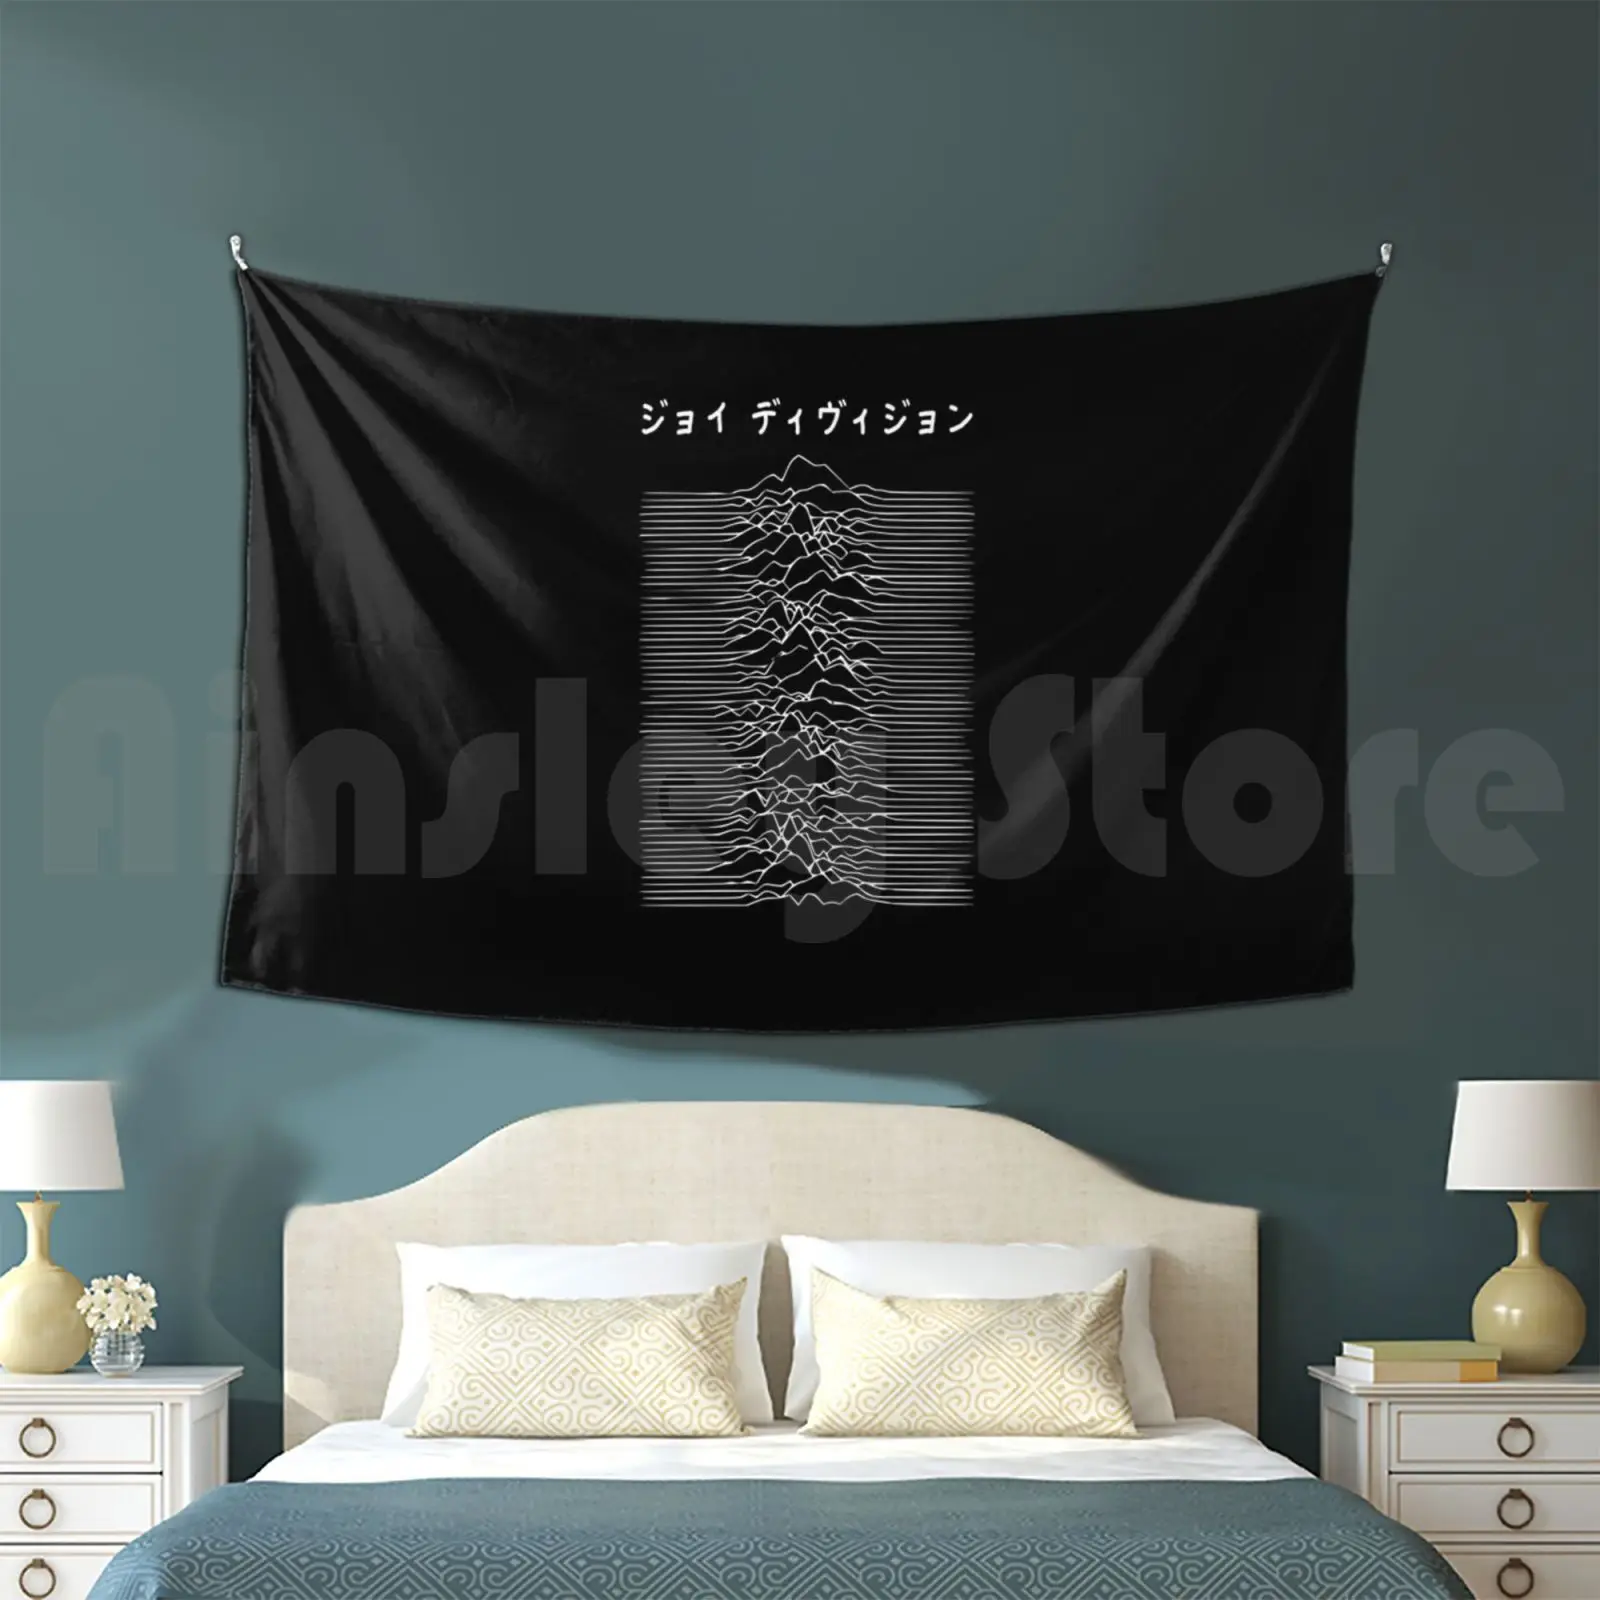 

Joy Division Tapestry Living Room Bedroom Joy Division New Order Music Ian Curtis Punk Band Post Punk Factory Records